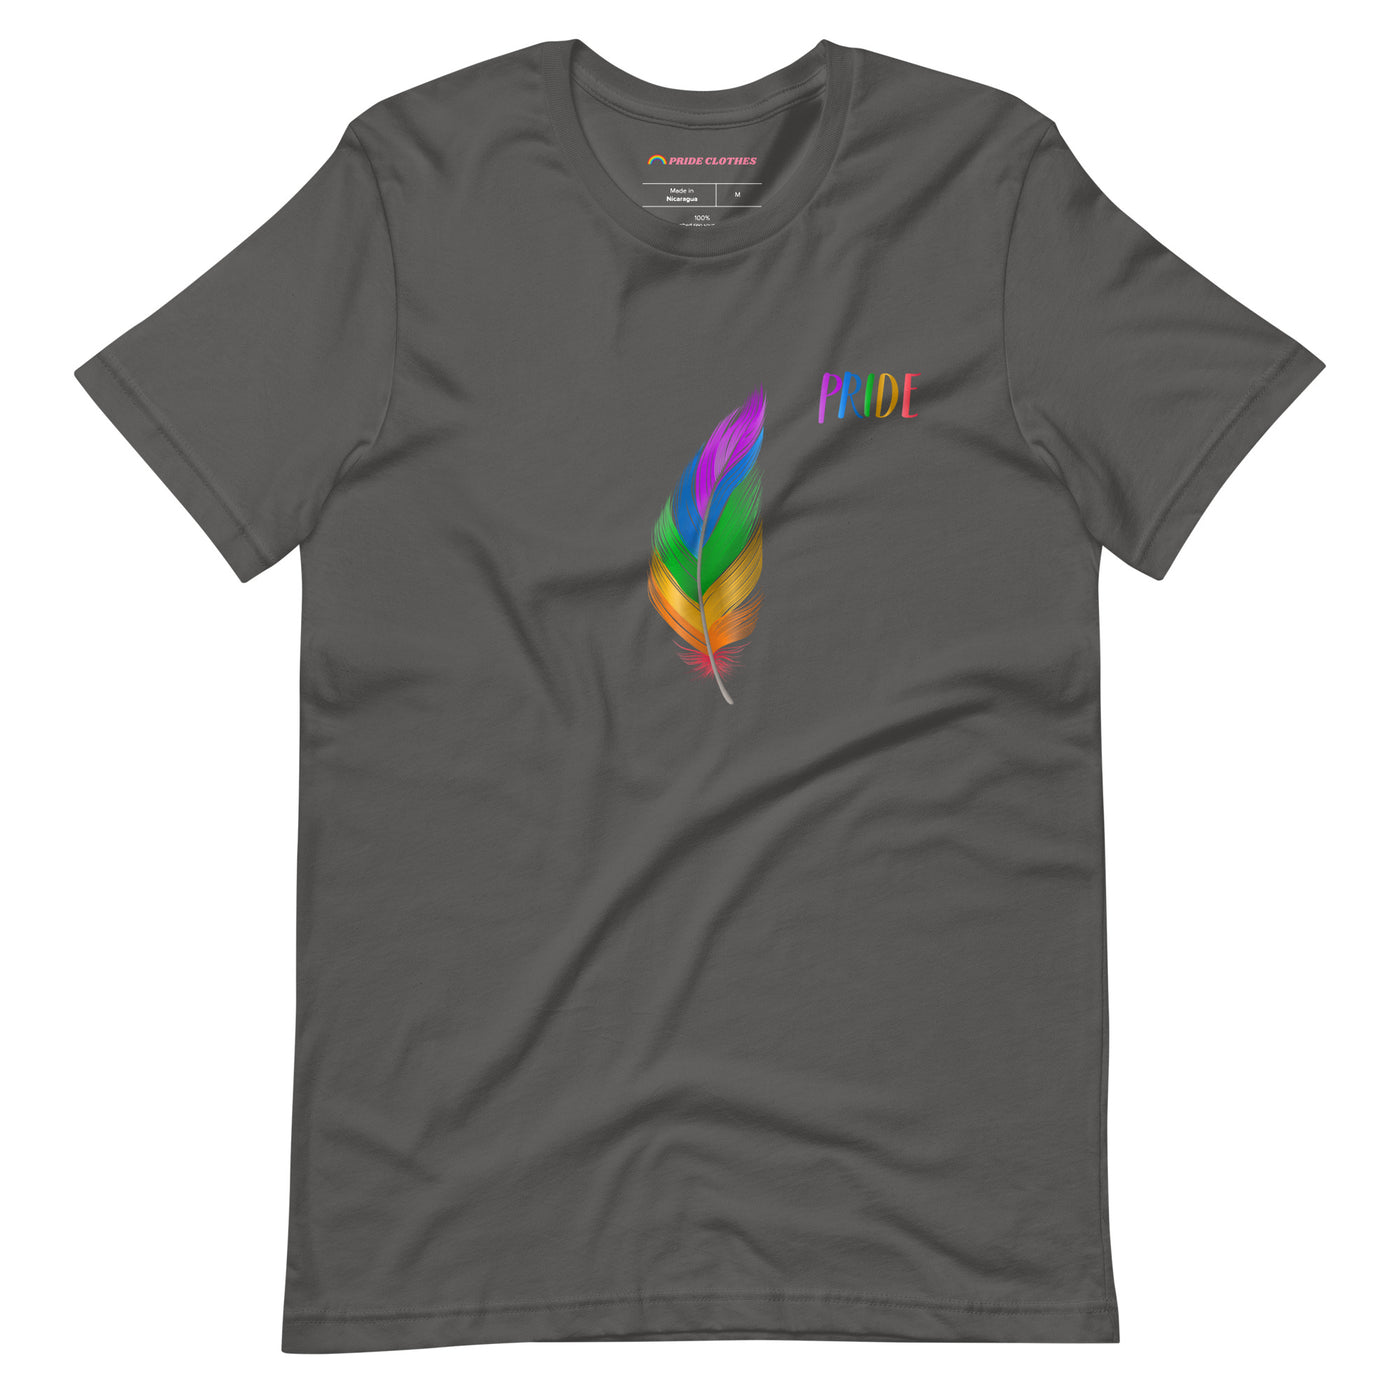 Pride Clothes - A Pride Feather Shirt That Can Make You Look and Feel Your Best - Asphalt